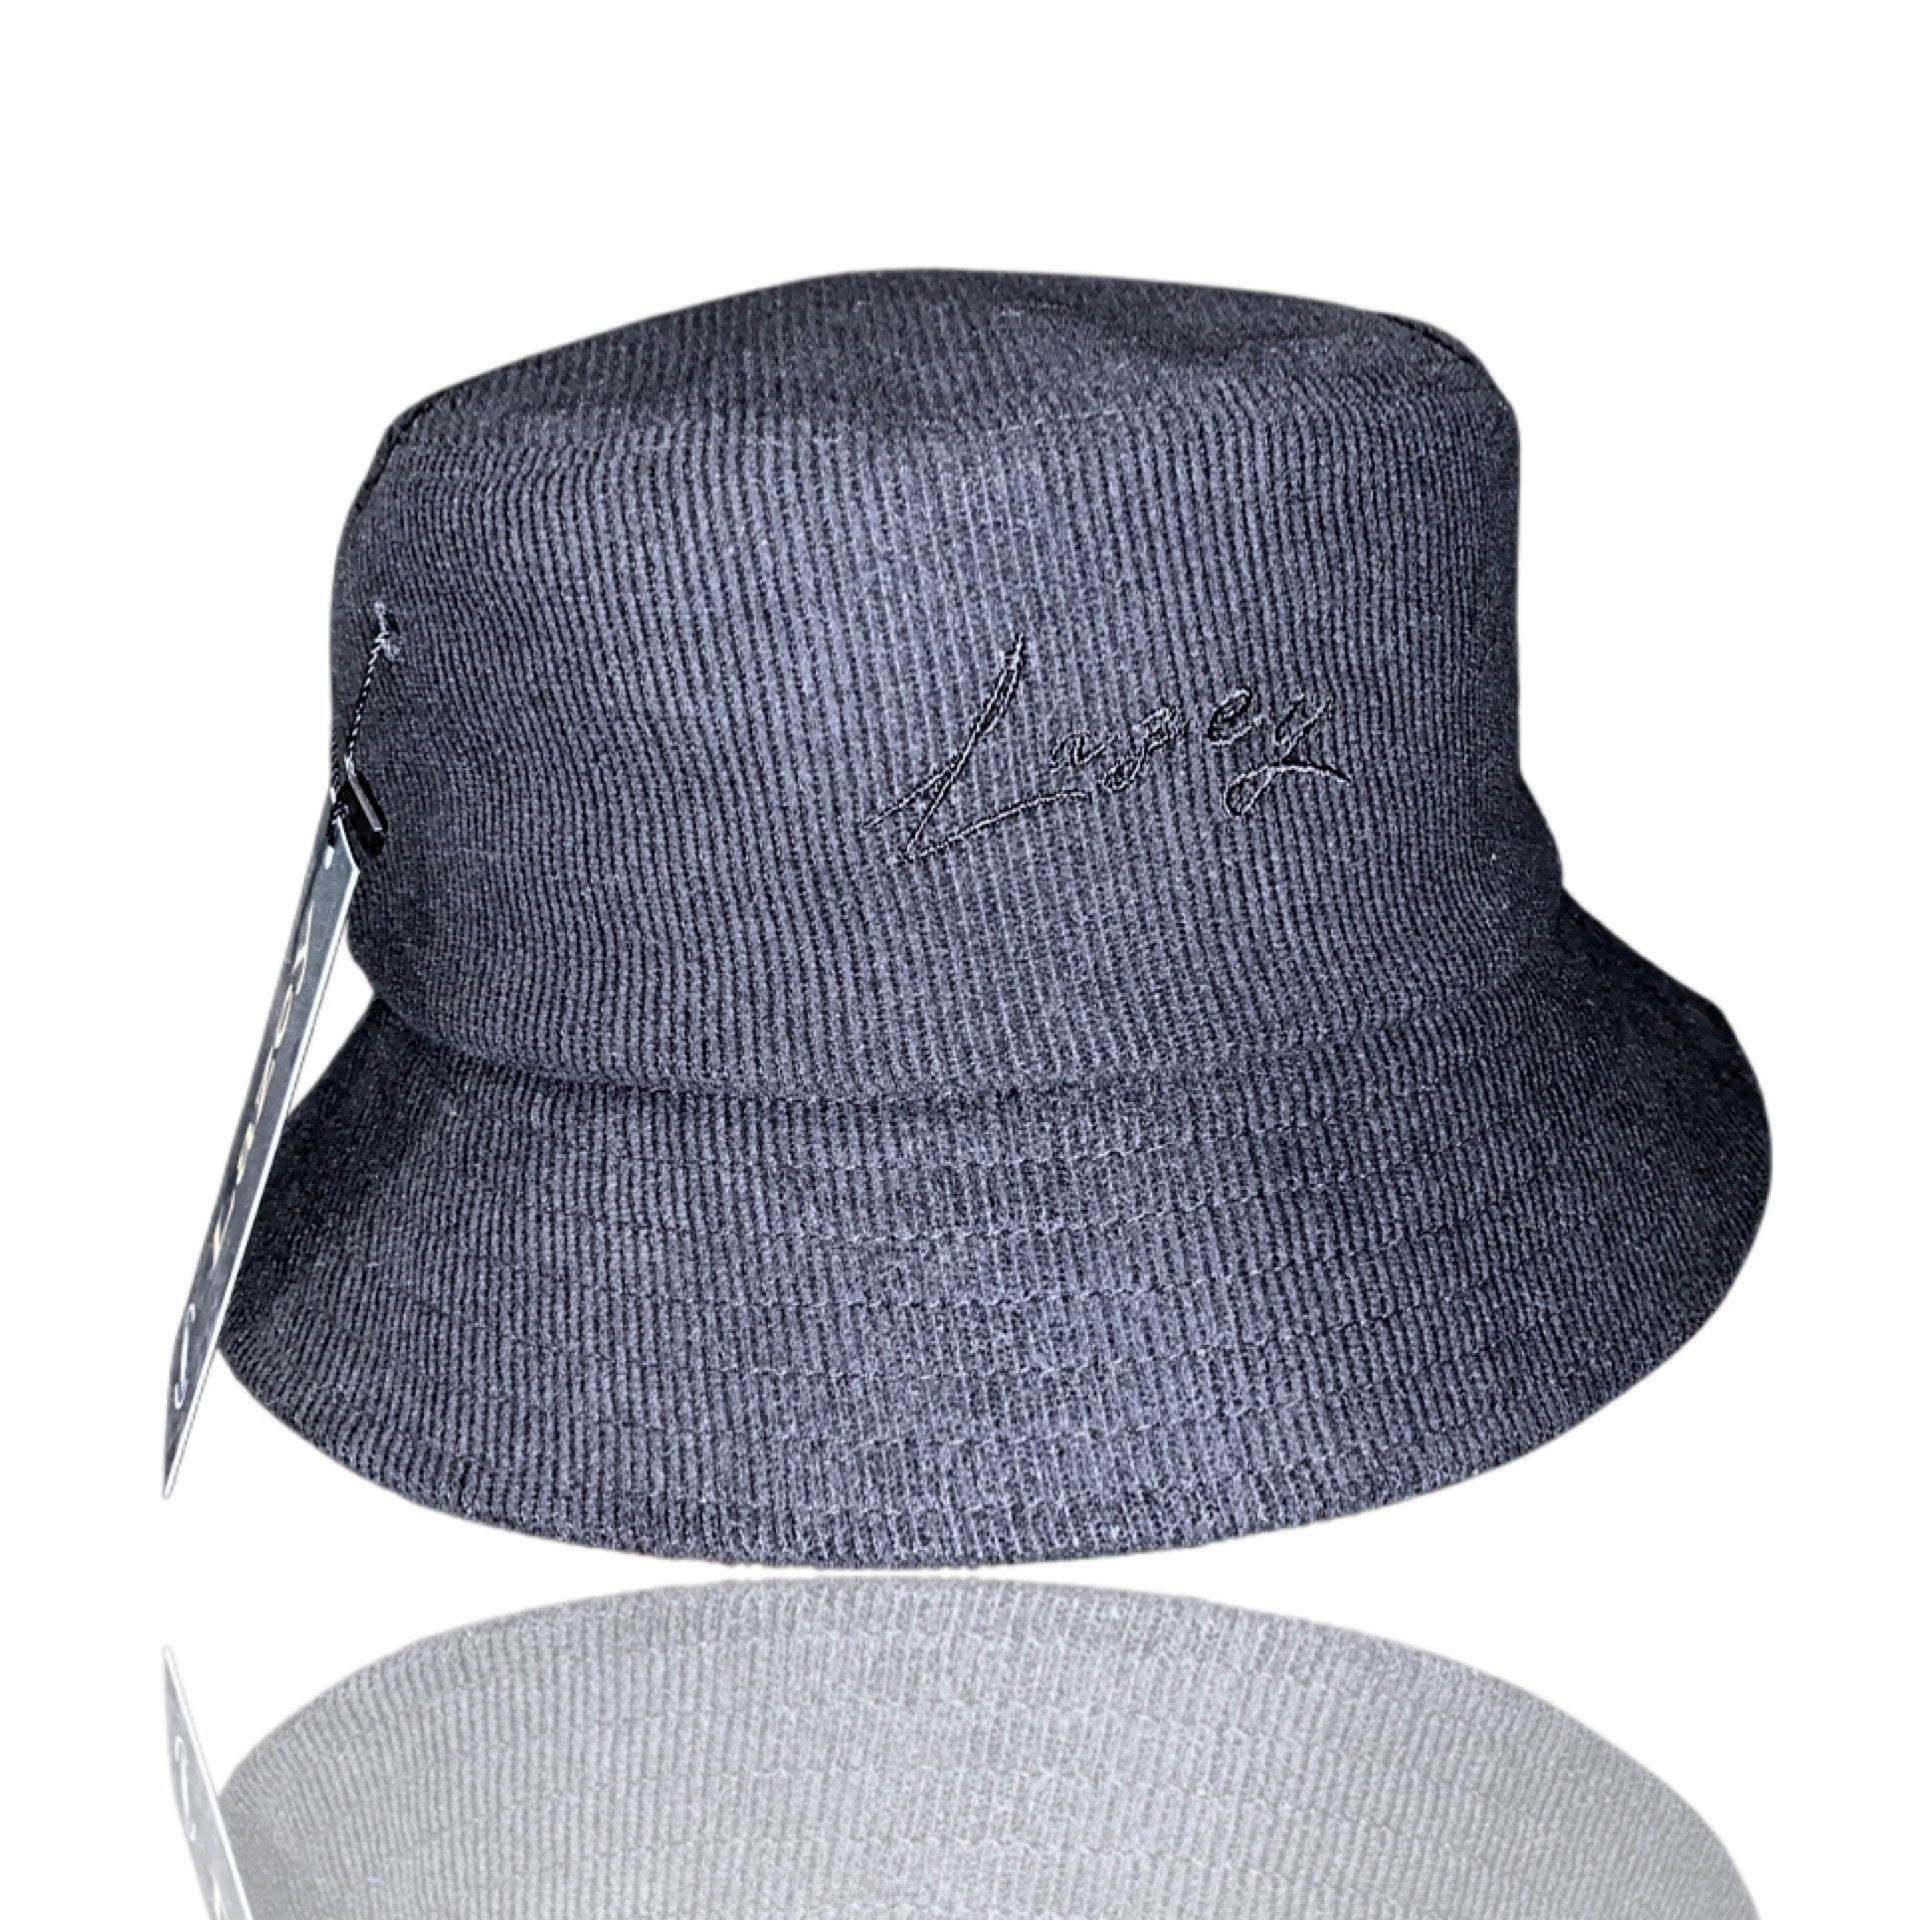 Corduroy Bucket Hat. - Adjustable Drawstring Inside Hat - One Size Fits  Most - 100% Polyester, 728262